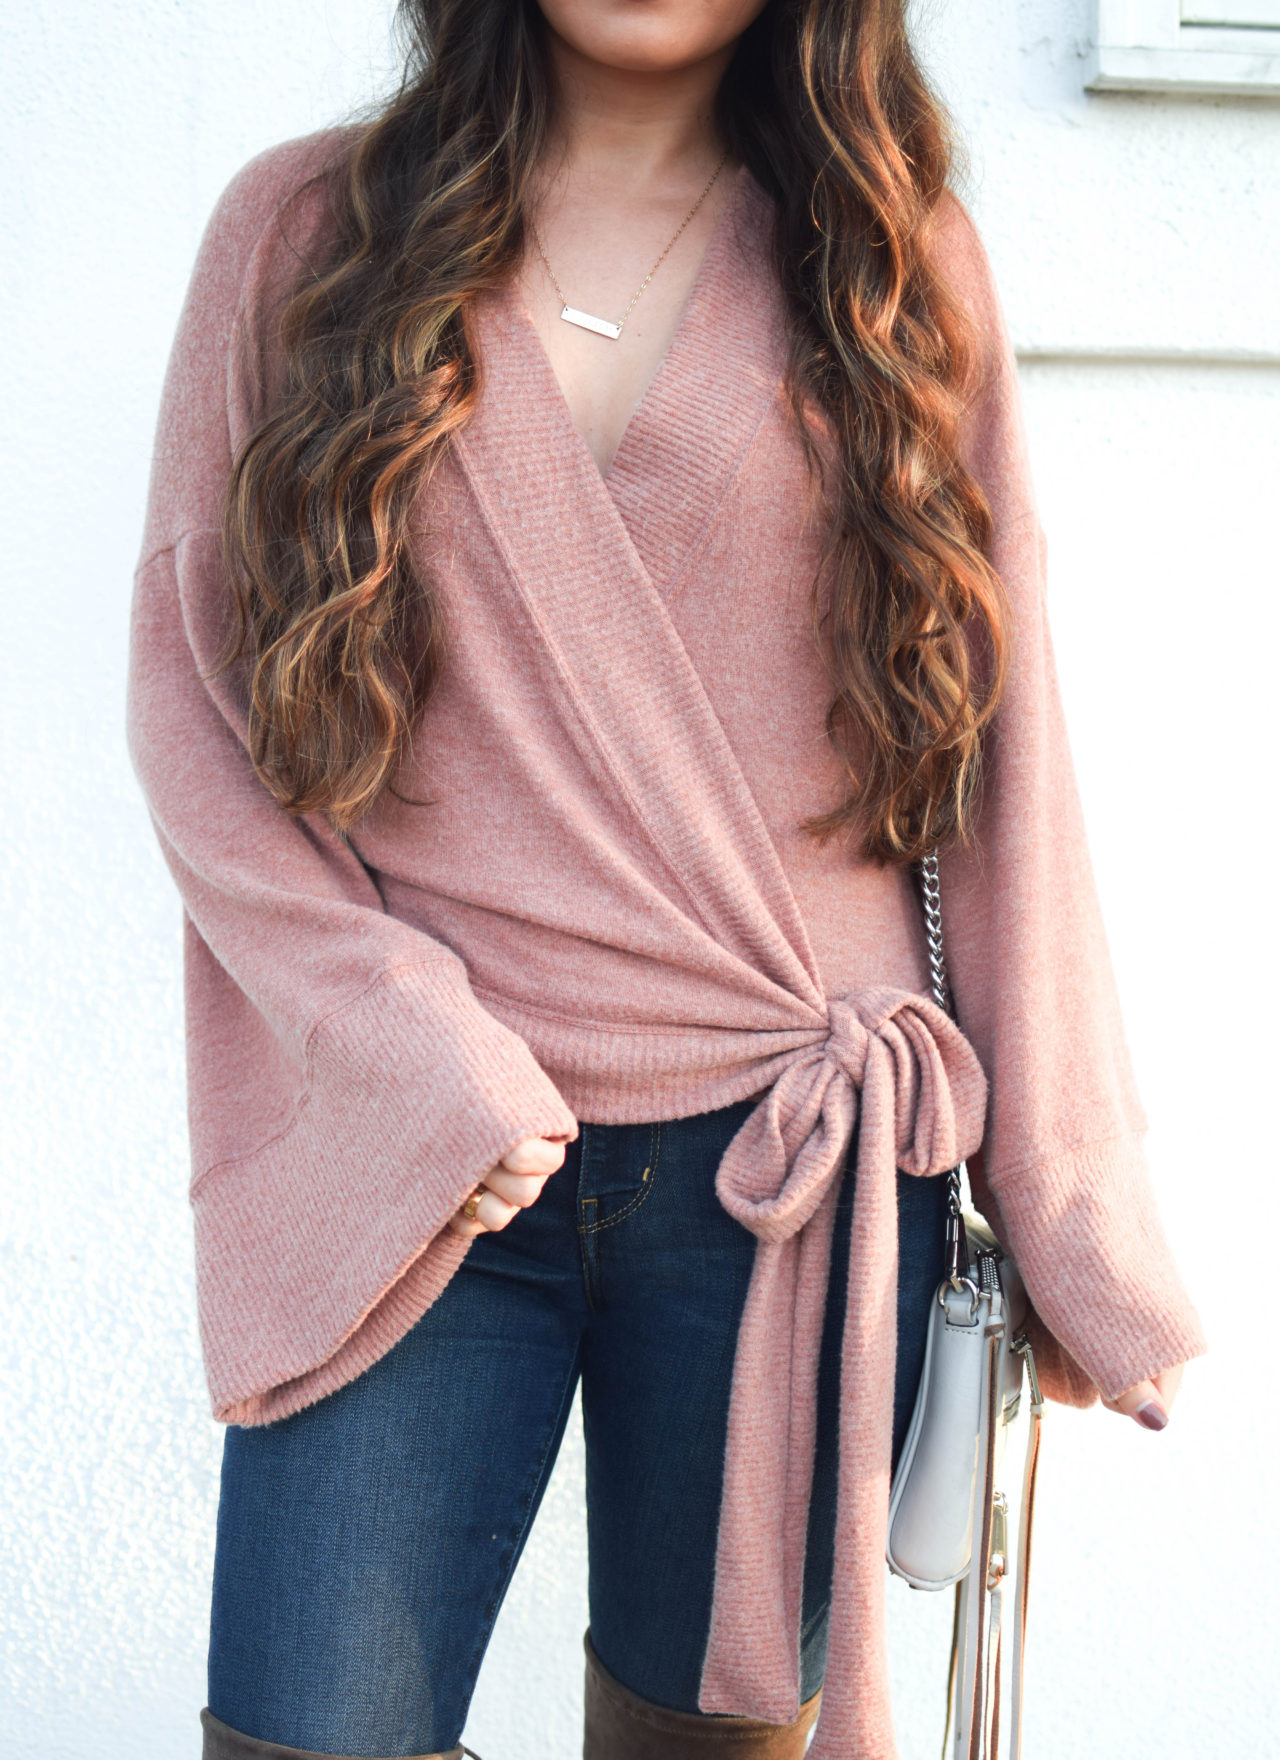 Wrap Top & Casual Valentine’s Day Outfit